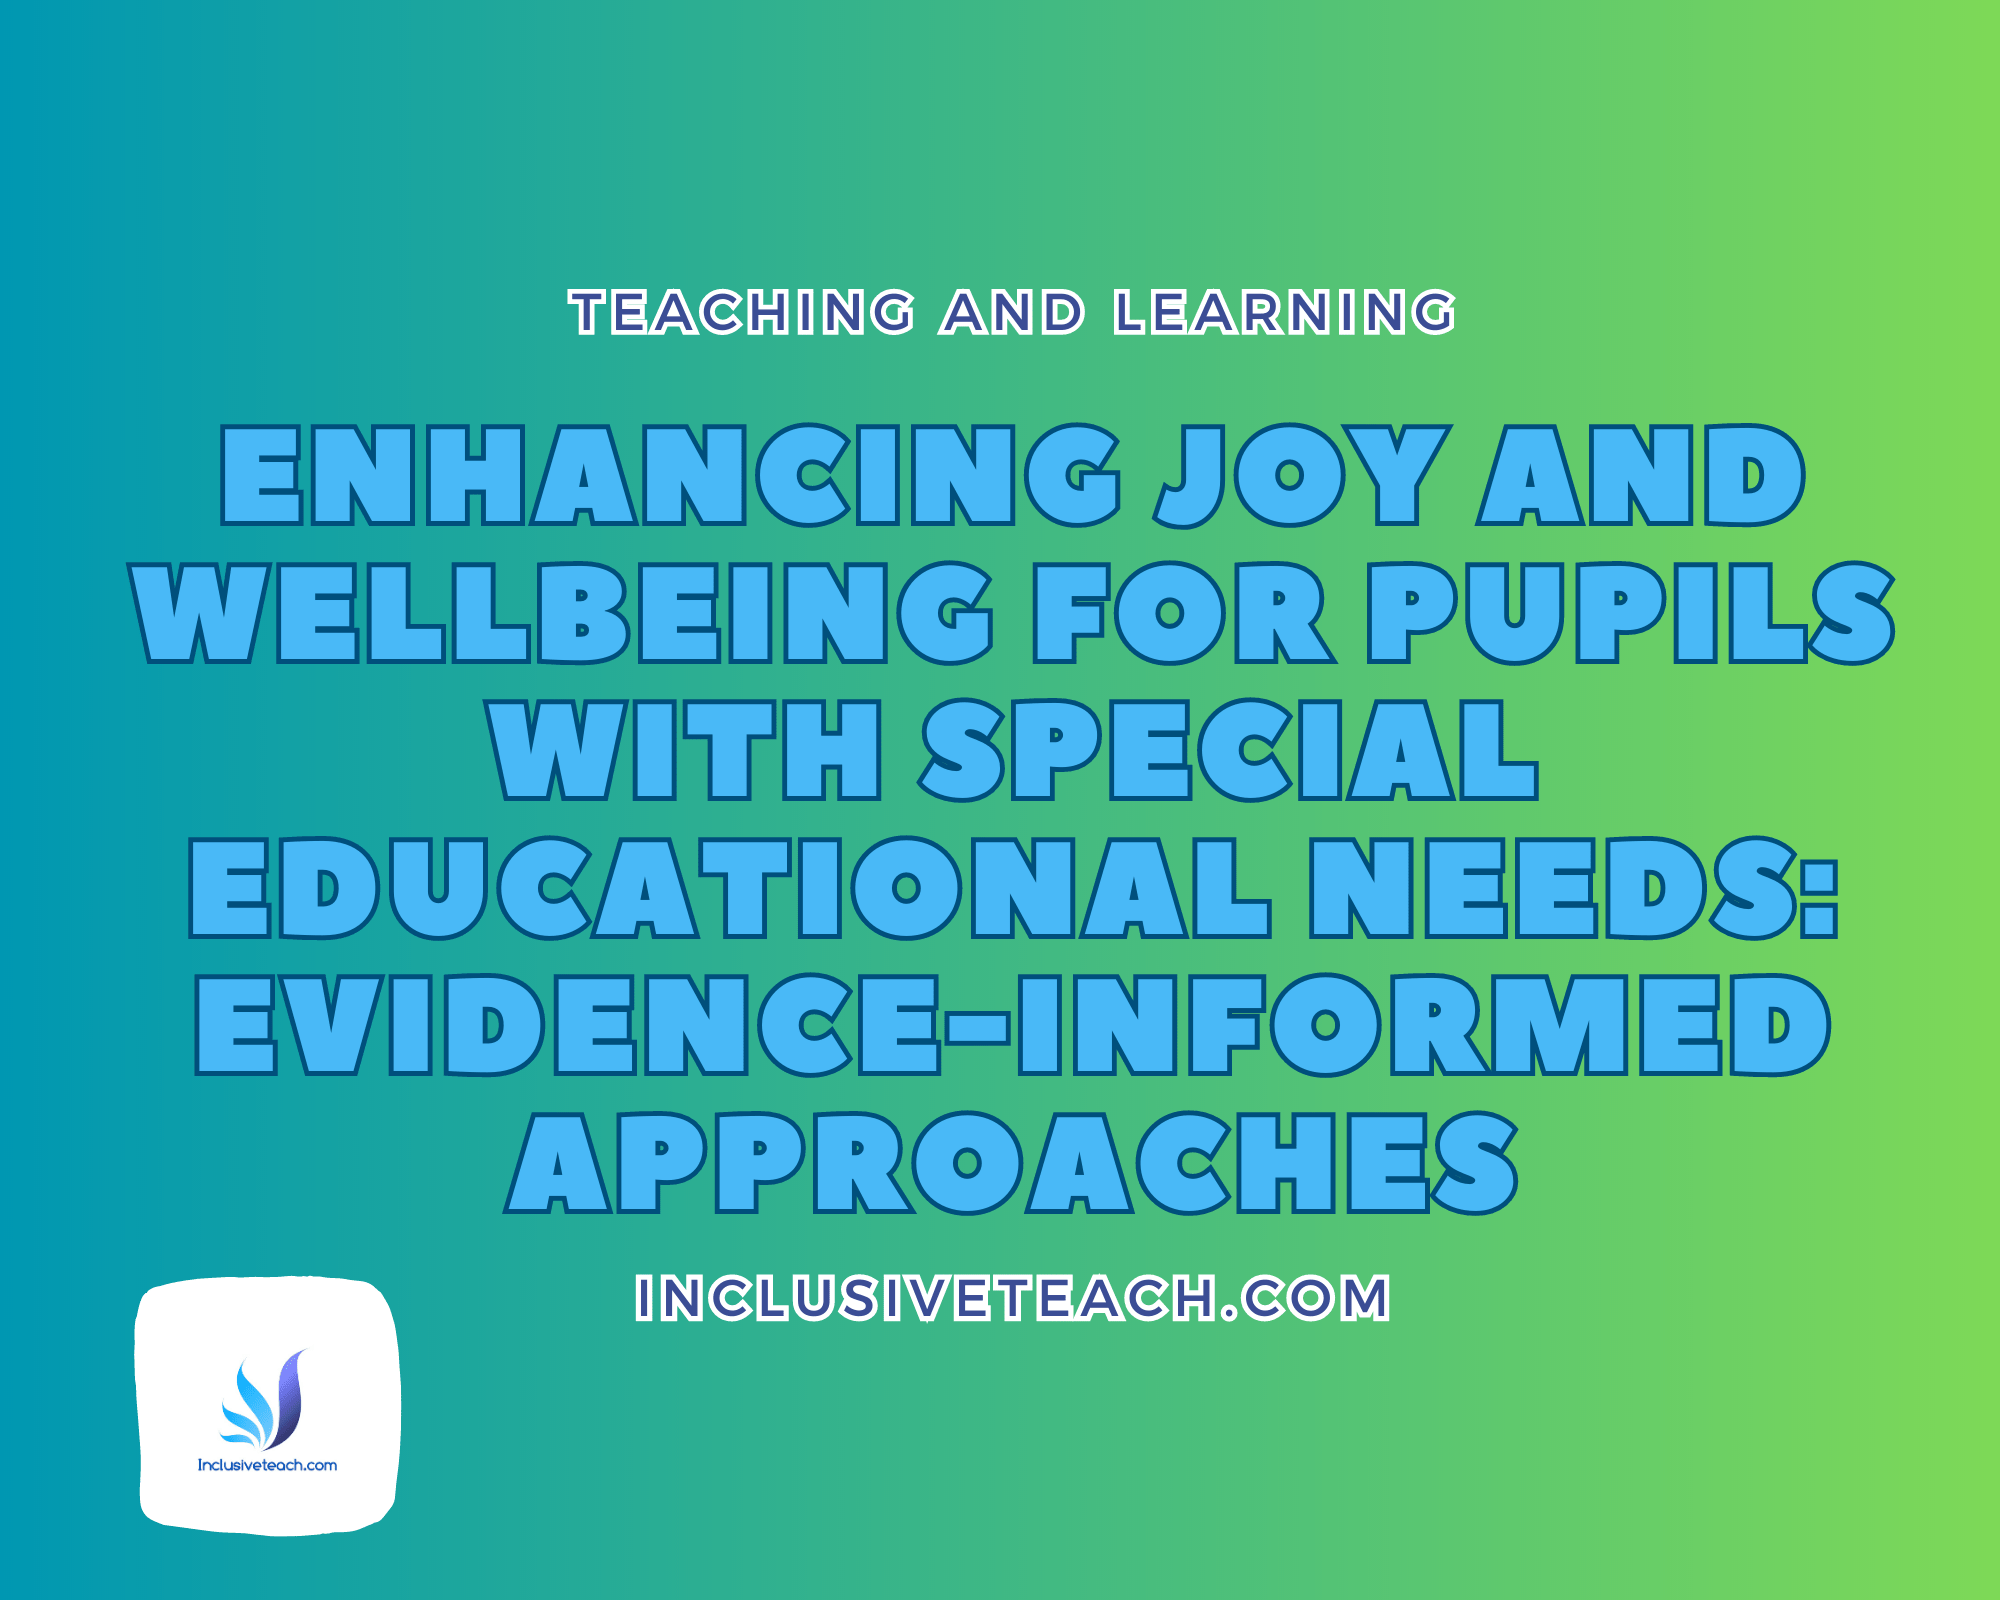 Enhancing Joy And Wellbeing For Pupils With Special Educational Needs Evidence Informed